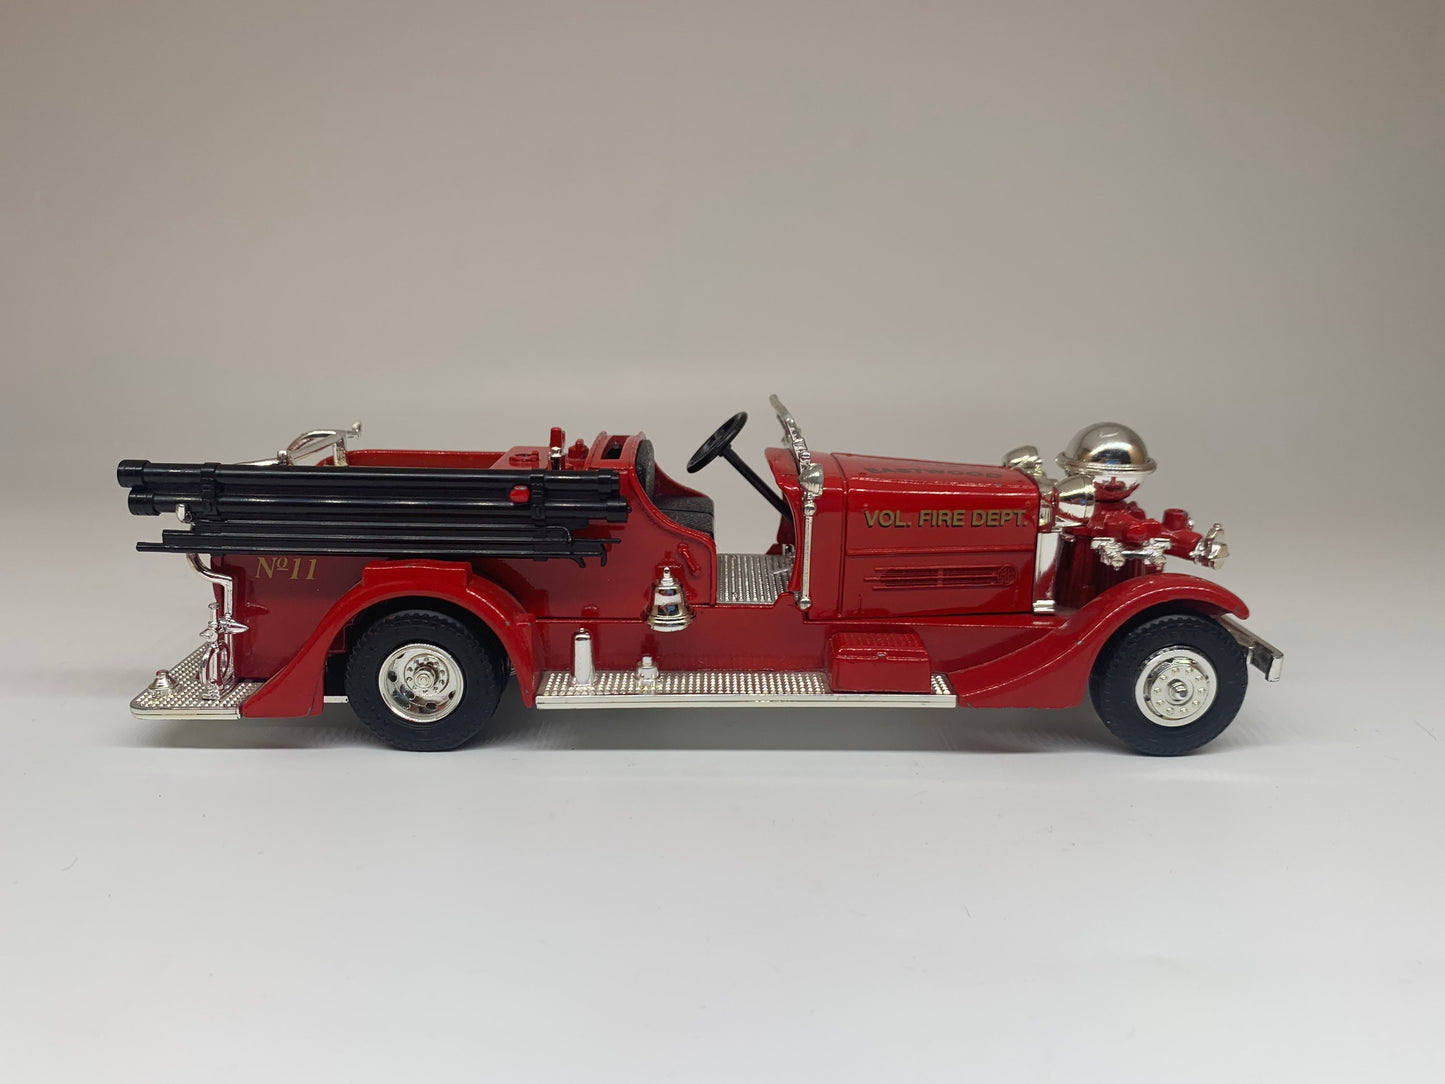 ERTL 1937 Ahrens-Fox Fire Truck Red Coin Bank Collectable Diecast Scale Model Toy Car Perfect Birthday Gift